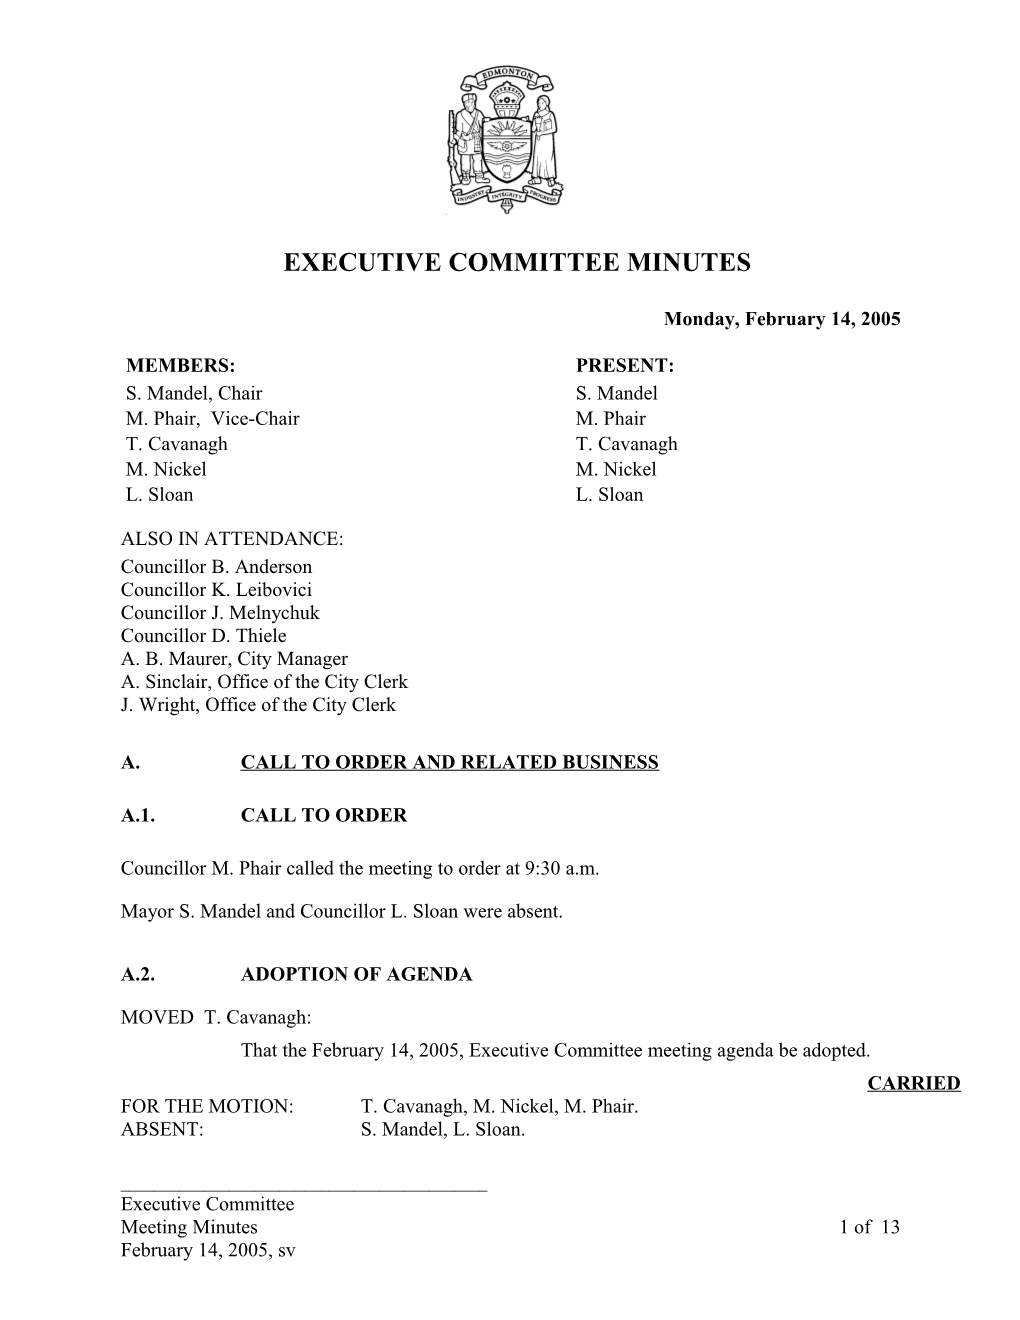 Minutes for Executive Committee February 14, 2005 Meeting